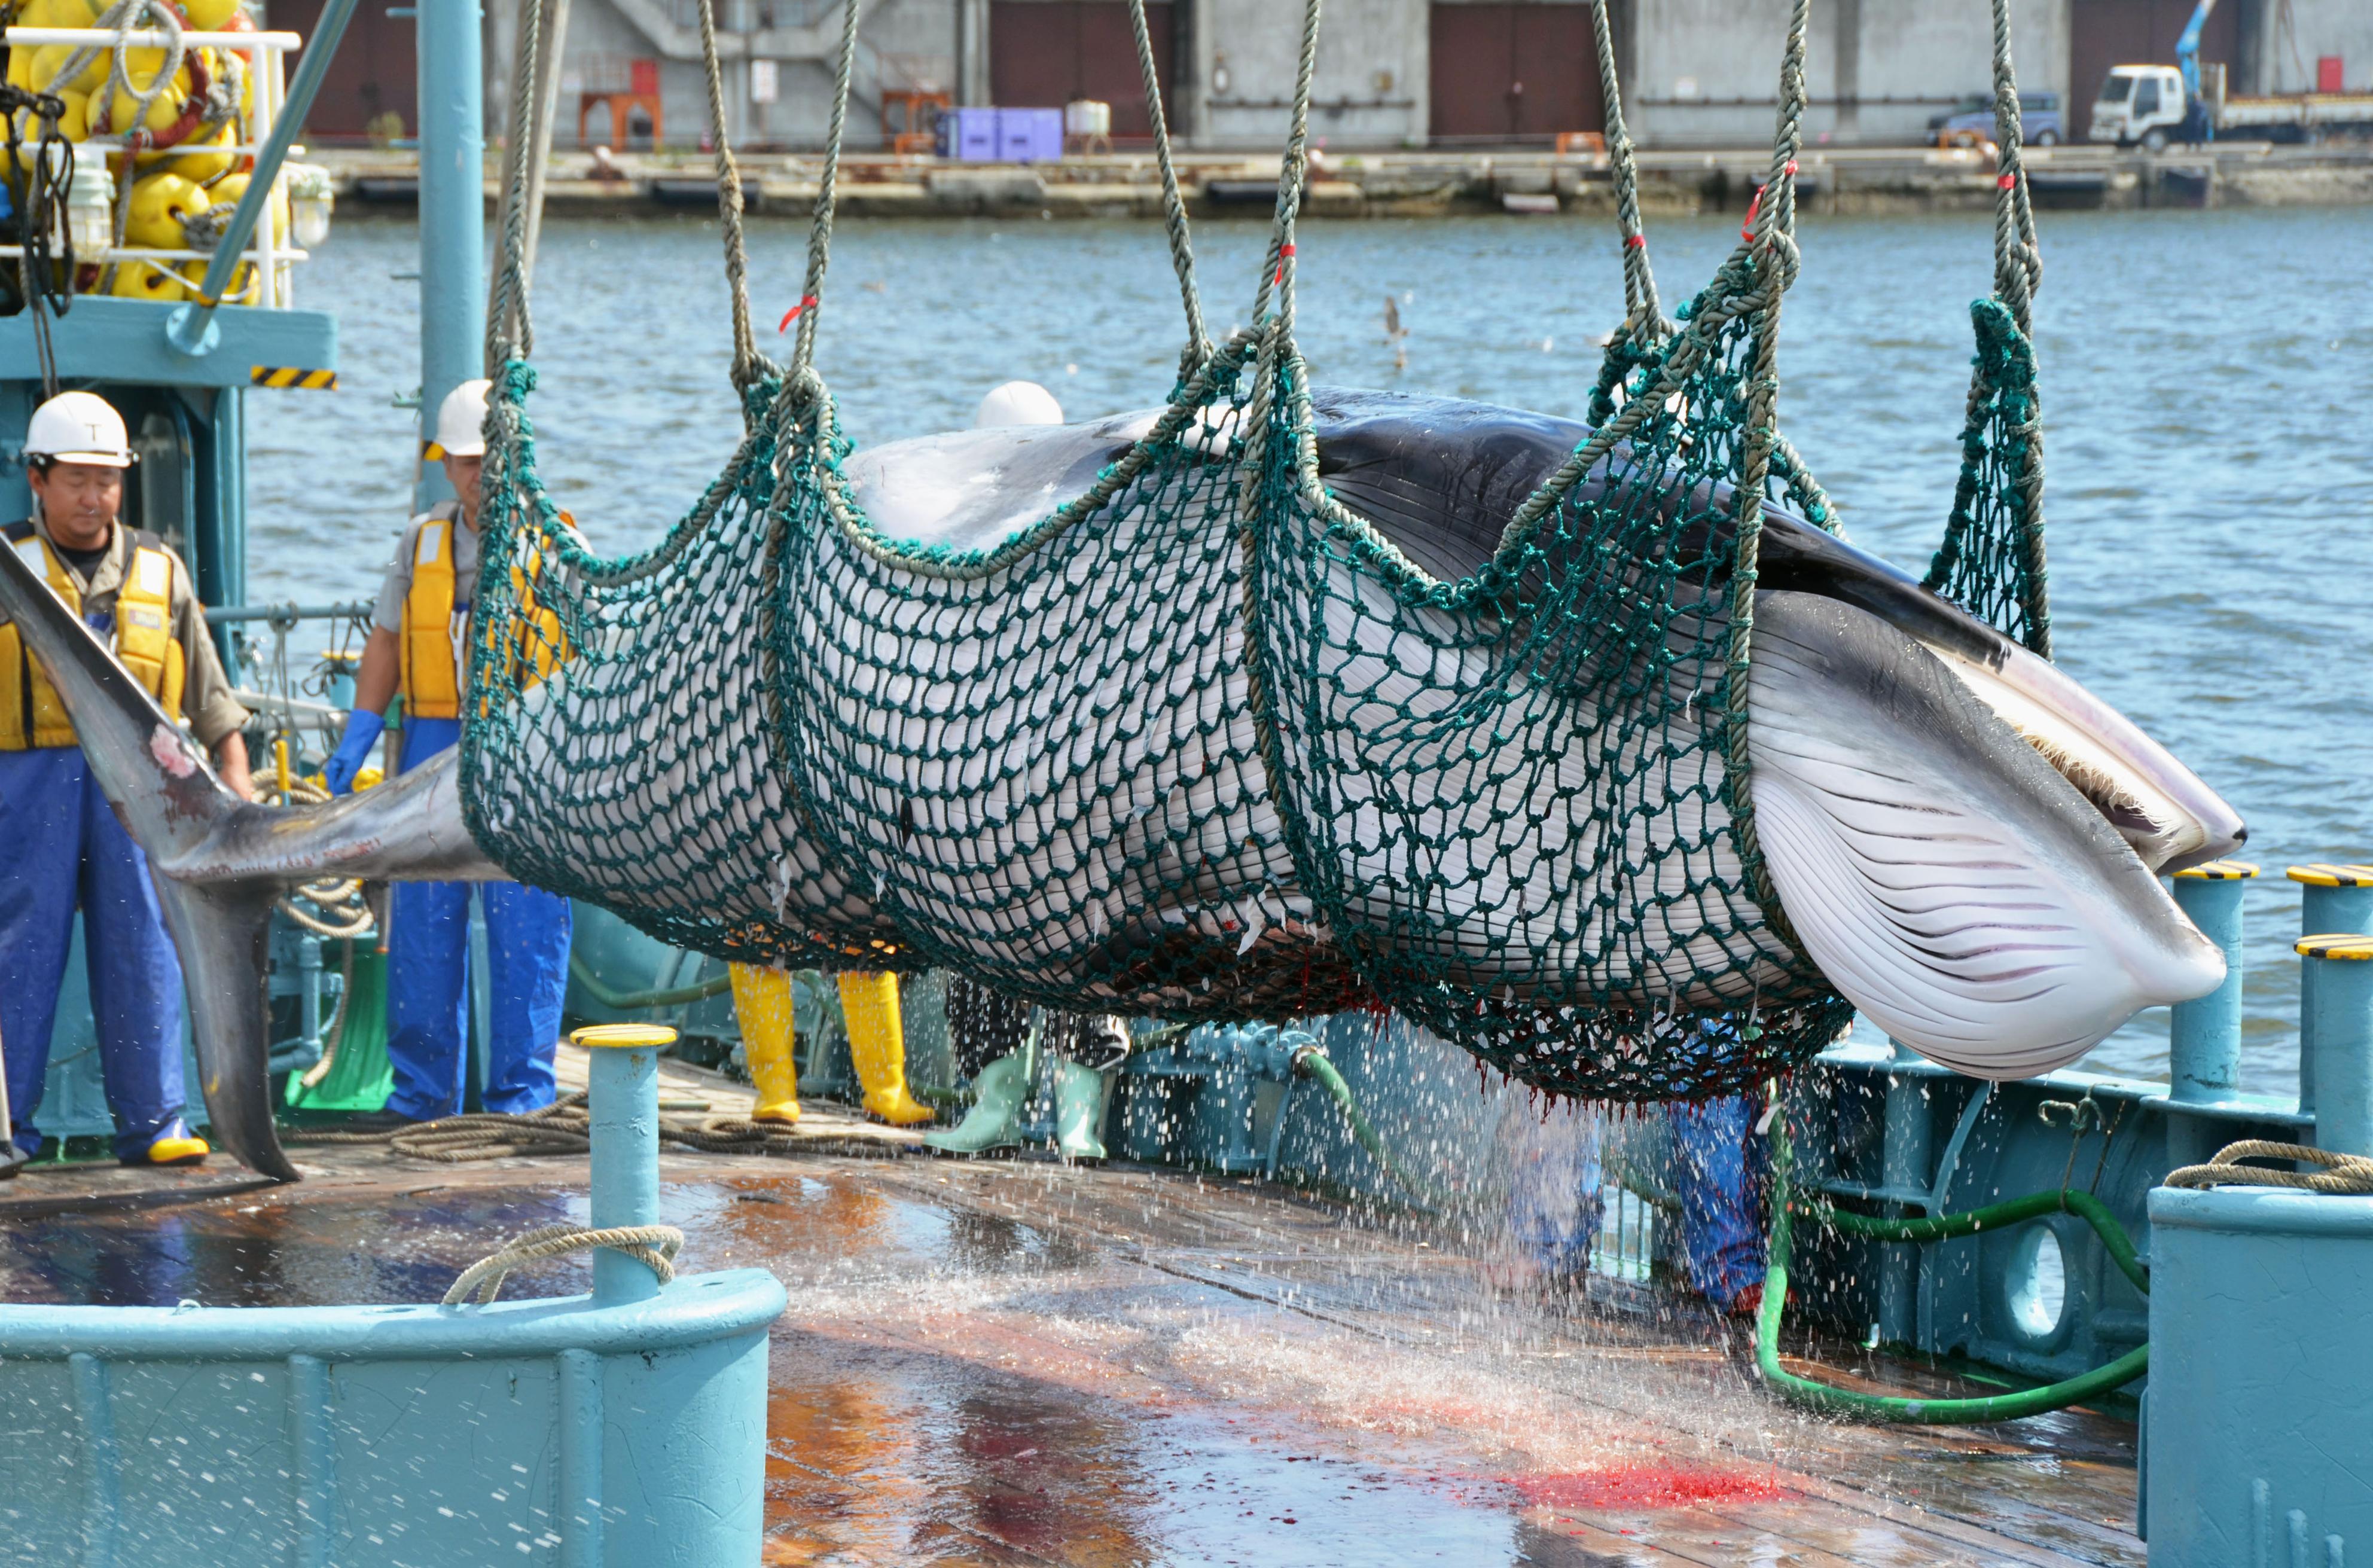 One of eight minke whales caught in Japan's whaling "for scientific research" off Kushiro in Hokkaido Prefecture, is unloaded at a local port on Sept. 5, 2015 (Kyodo/AP)